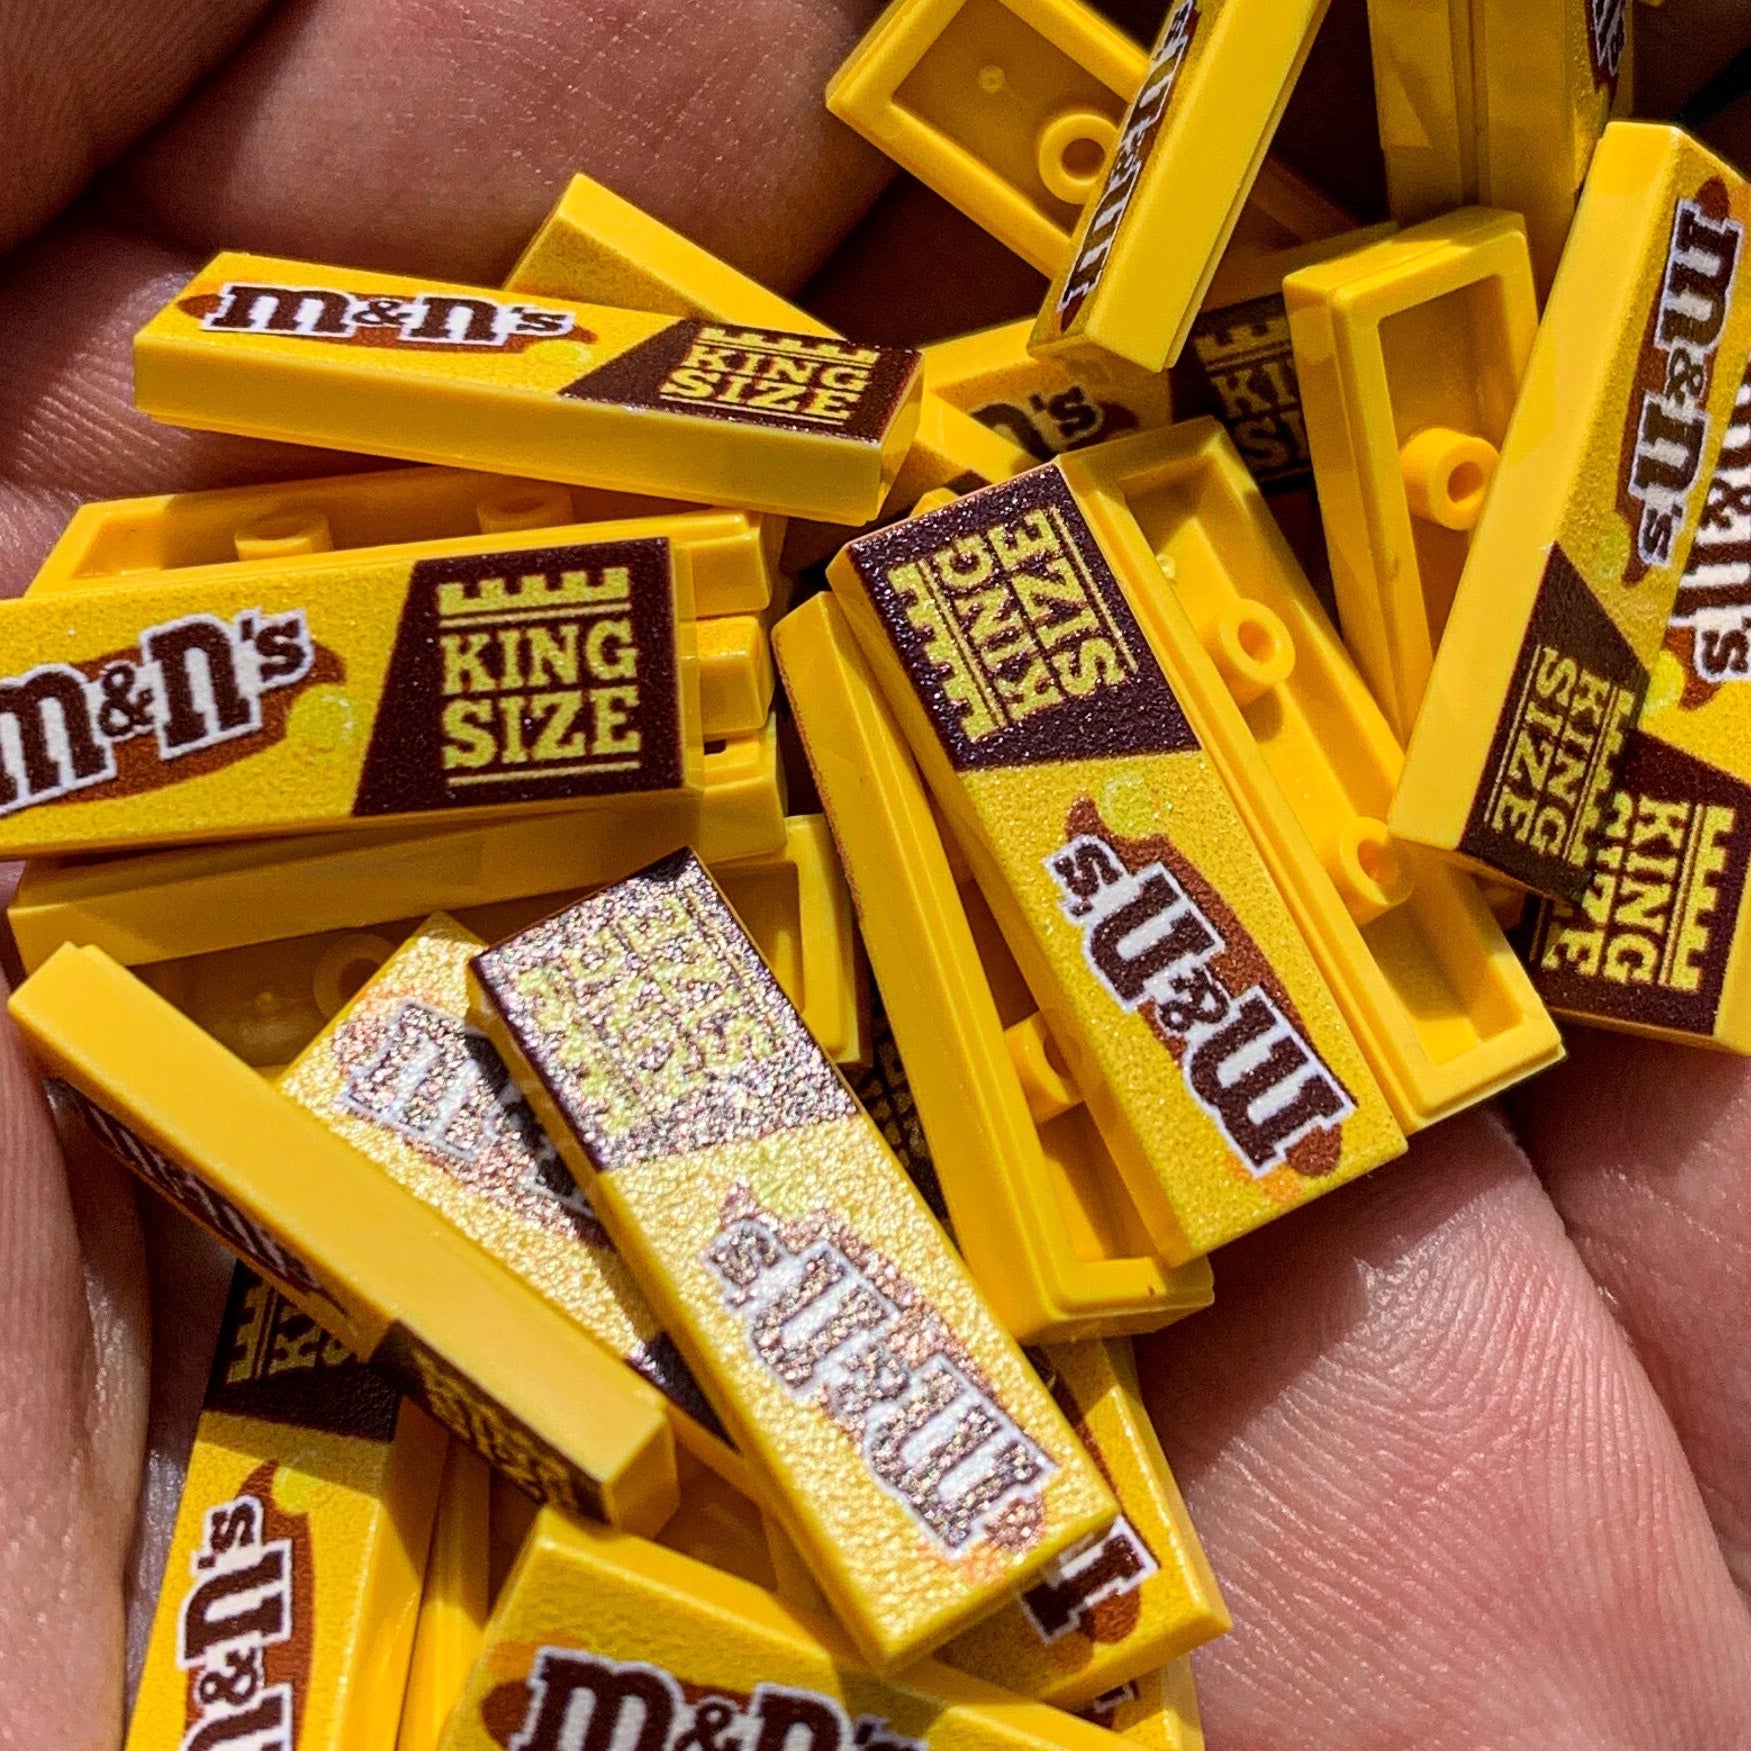 M&N's (Peanut) Candy (King Size) - B3 Customs® Printed 1x3 Tile